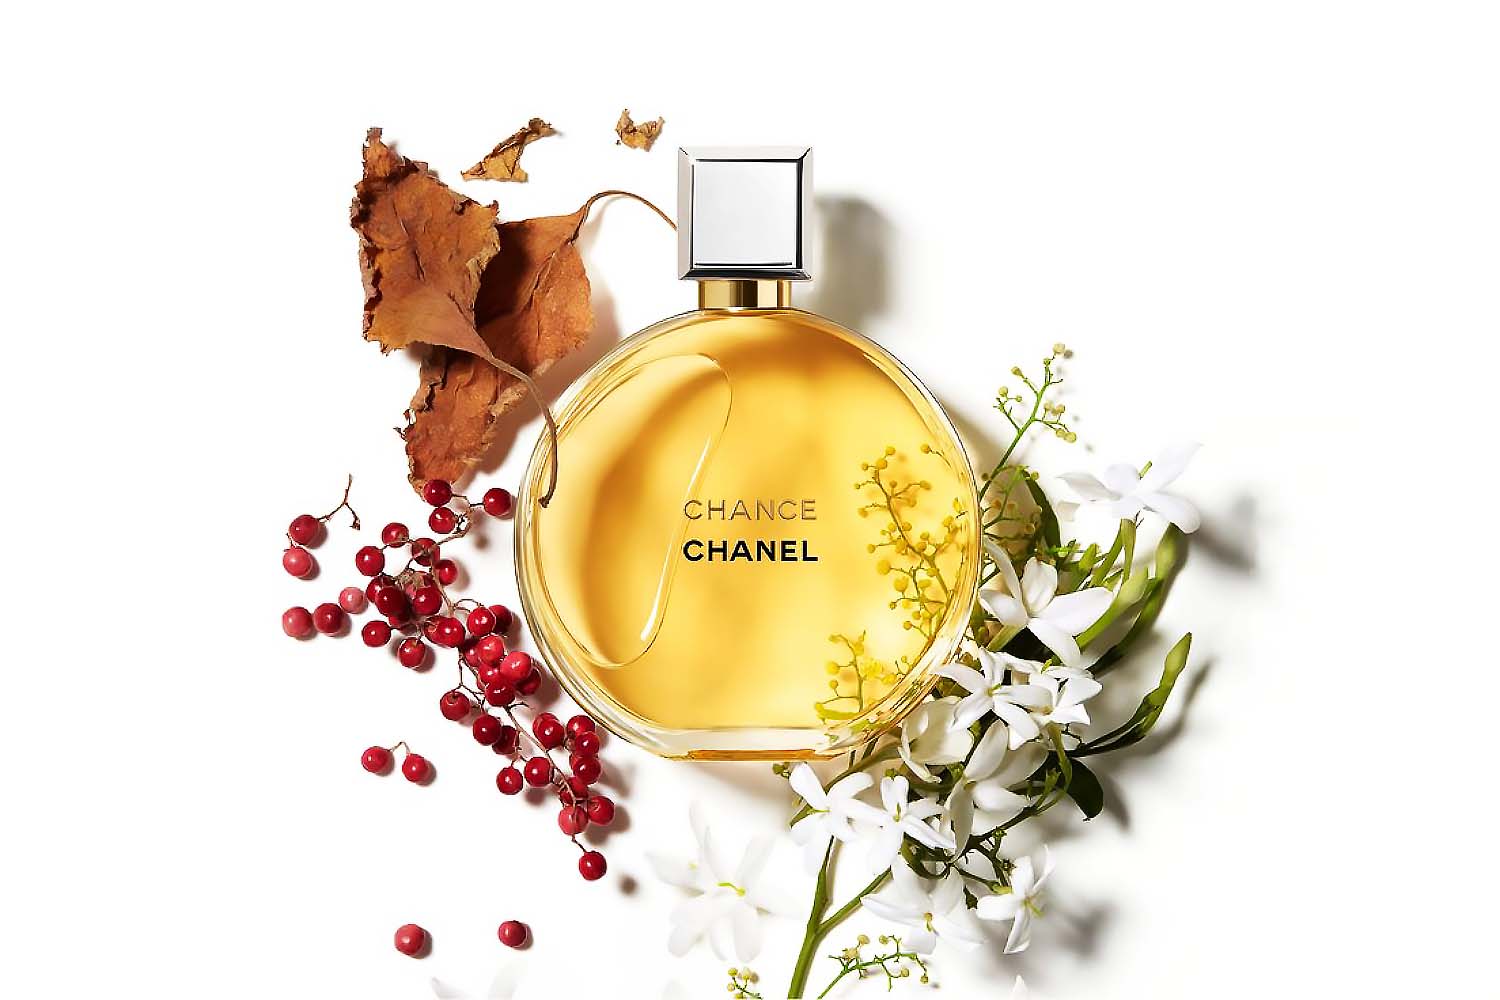 CHANEL CHANCE PARFUM Fragrance Review - The Rarest of the CHANCE Perfume  Range 